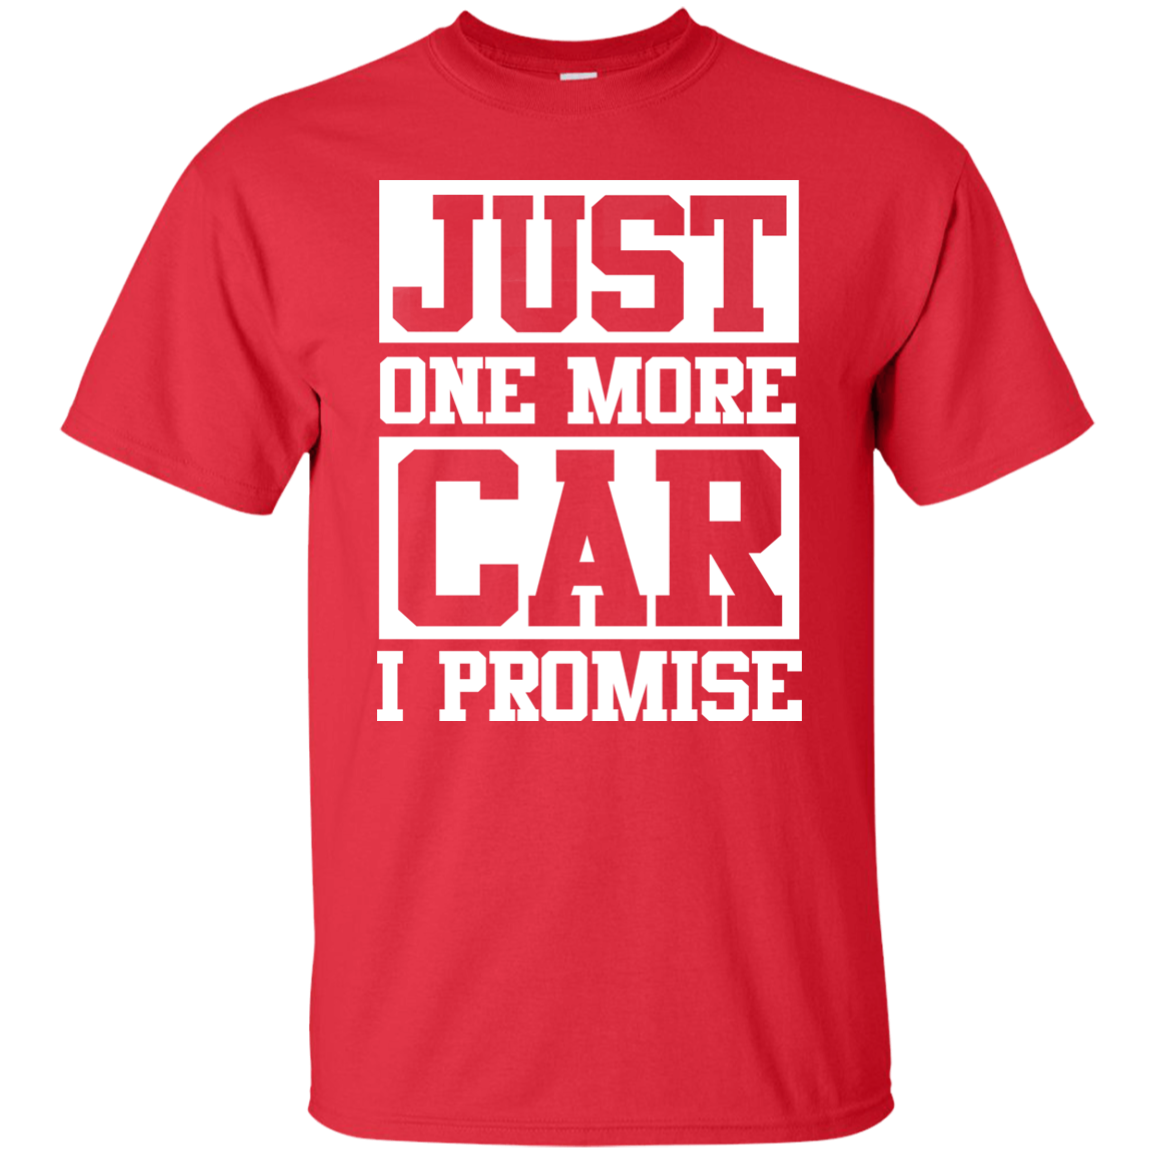 Just one more car i promise t shirt - ifrogtees